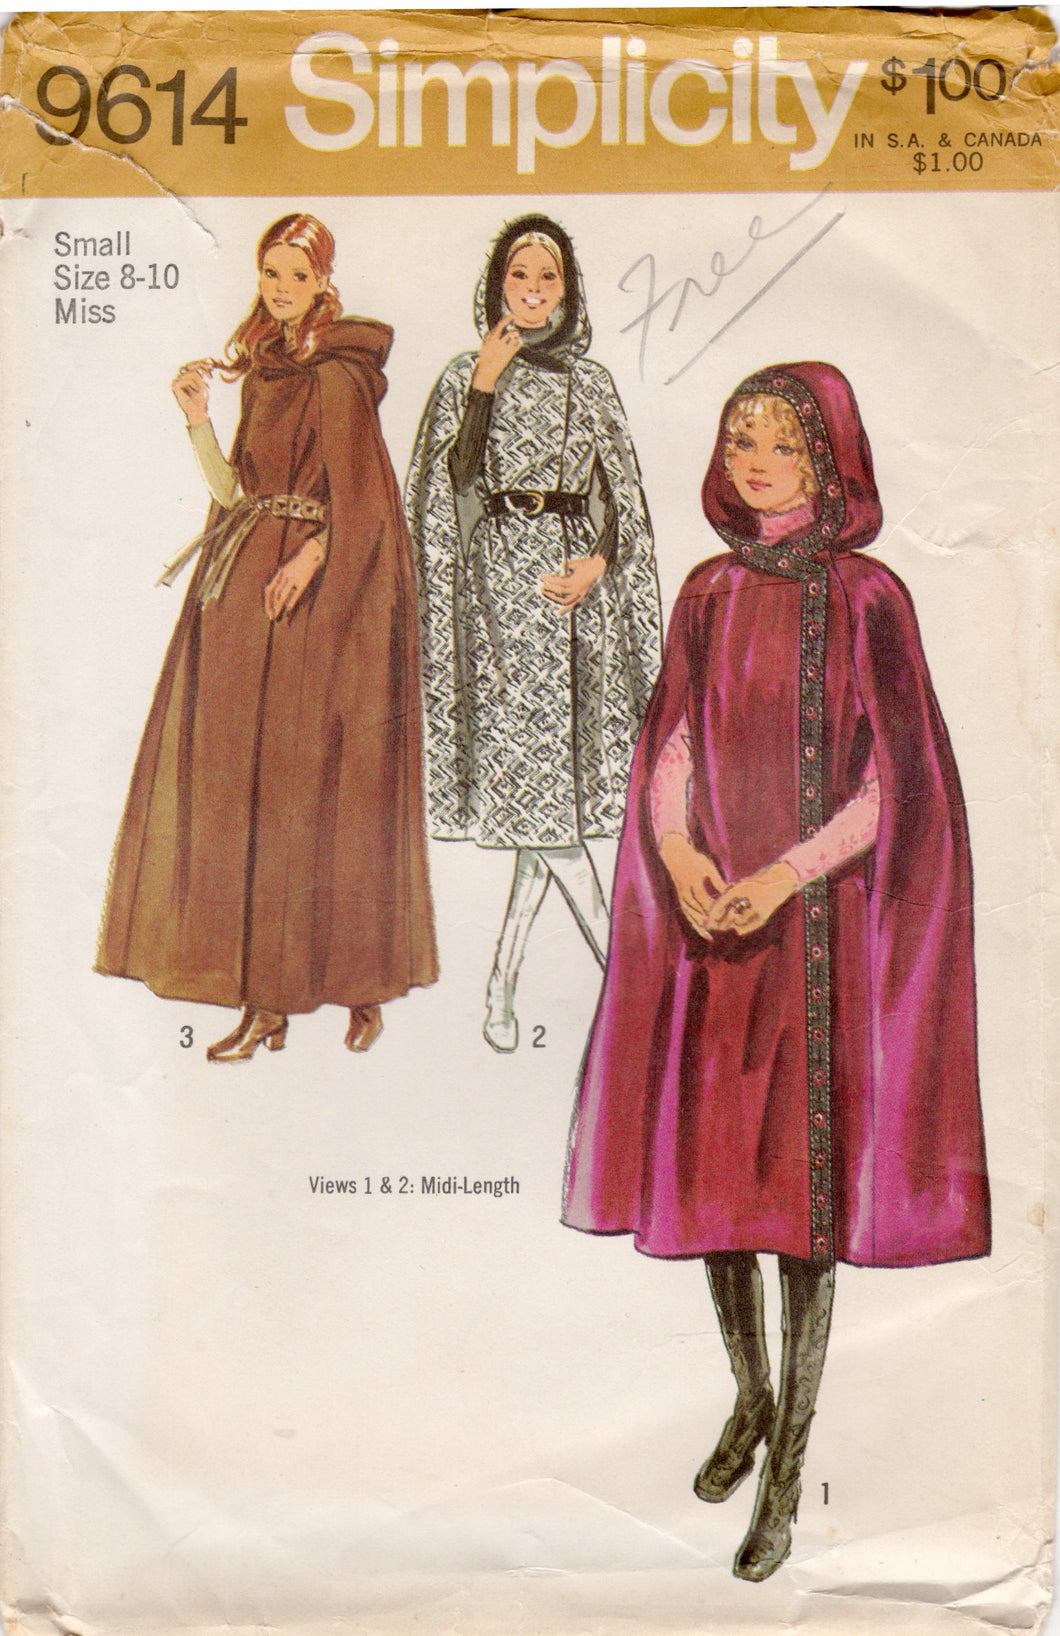 1970's Simplicity Hooded Cape Pattern in Three Styles - Bust 31.5-32.5